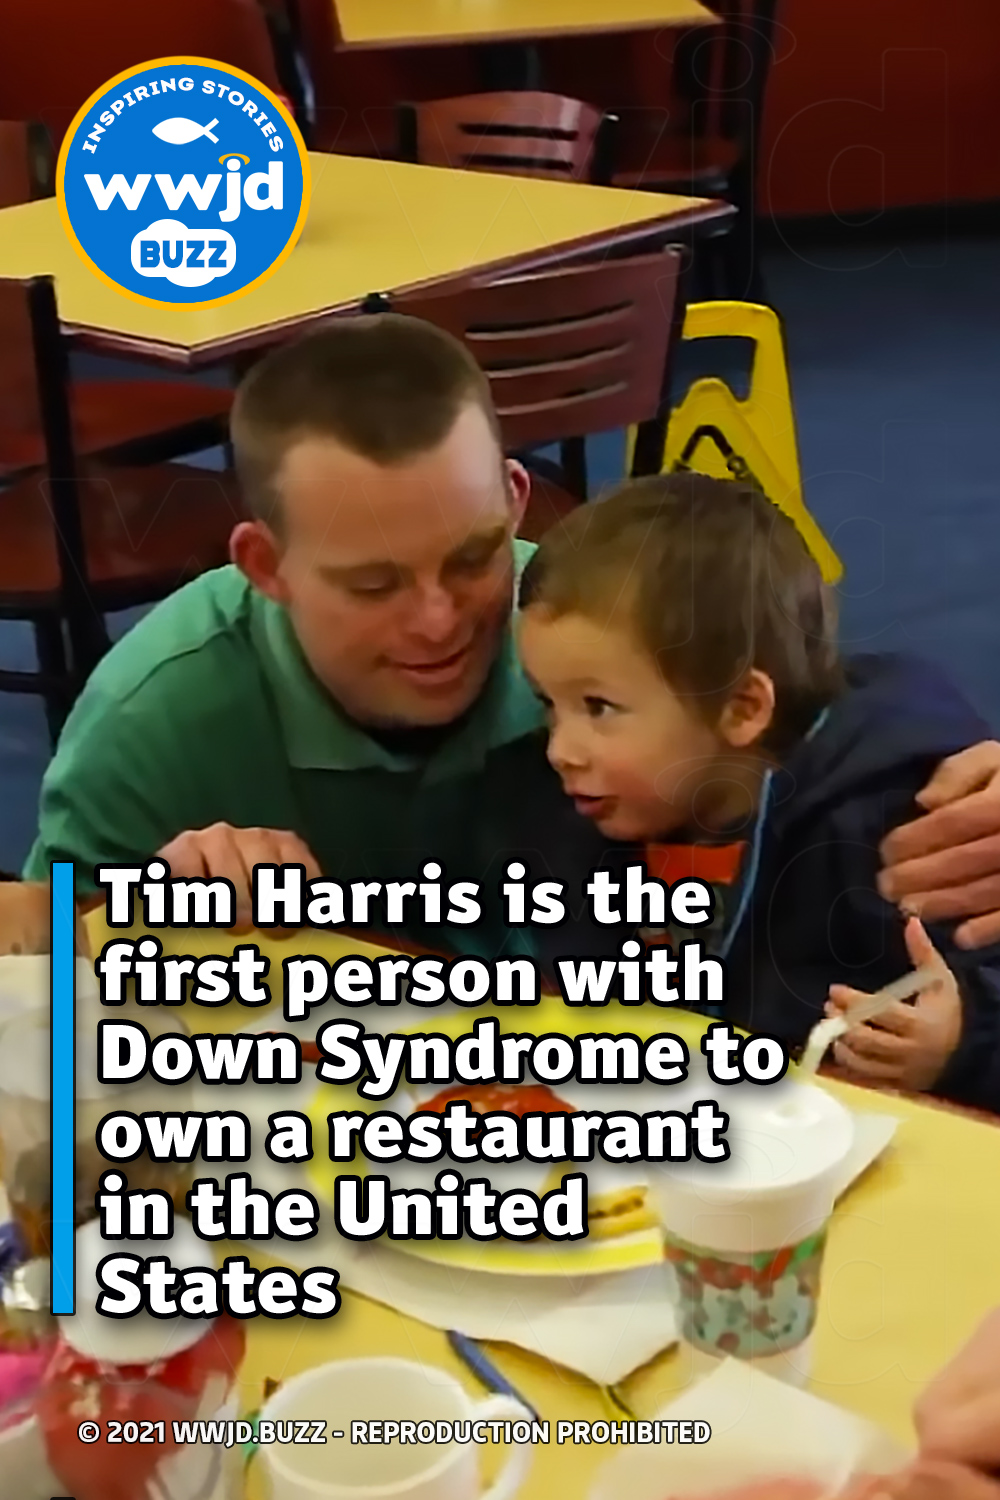 Tim Harris is the first person with Down Syndrome to own a restaurant in the United States